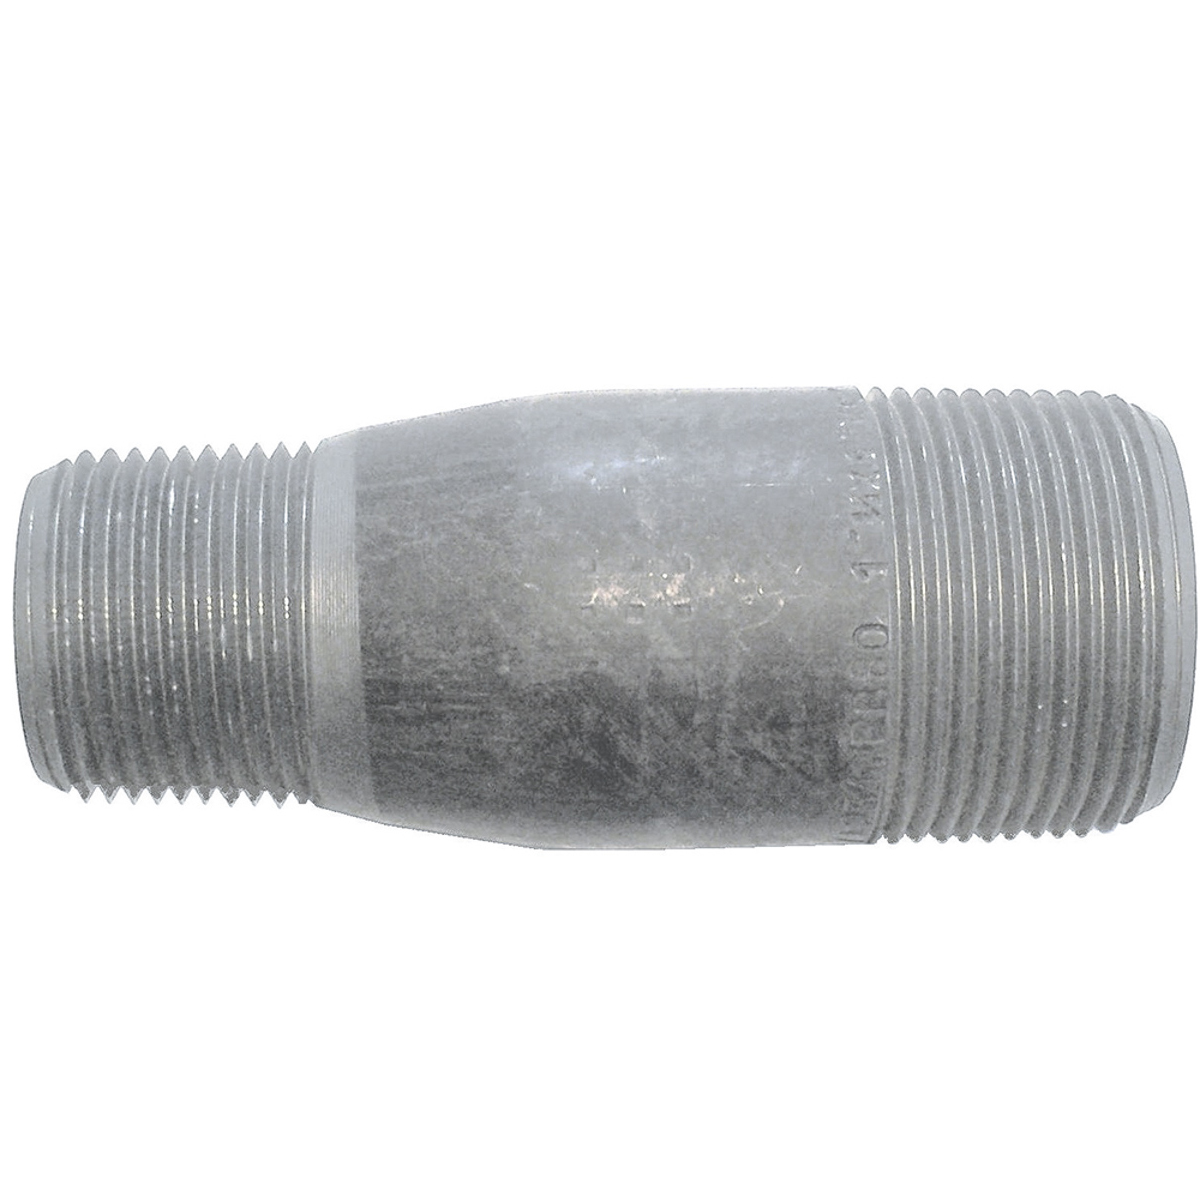 Everflow Supplies NPBL1040 4 Long Black Steel Nipple Pipe Fitting with 1 Nominal Size Diameter 